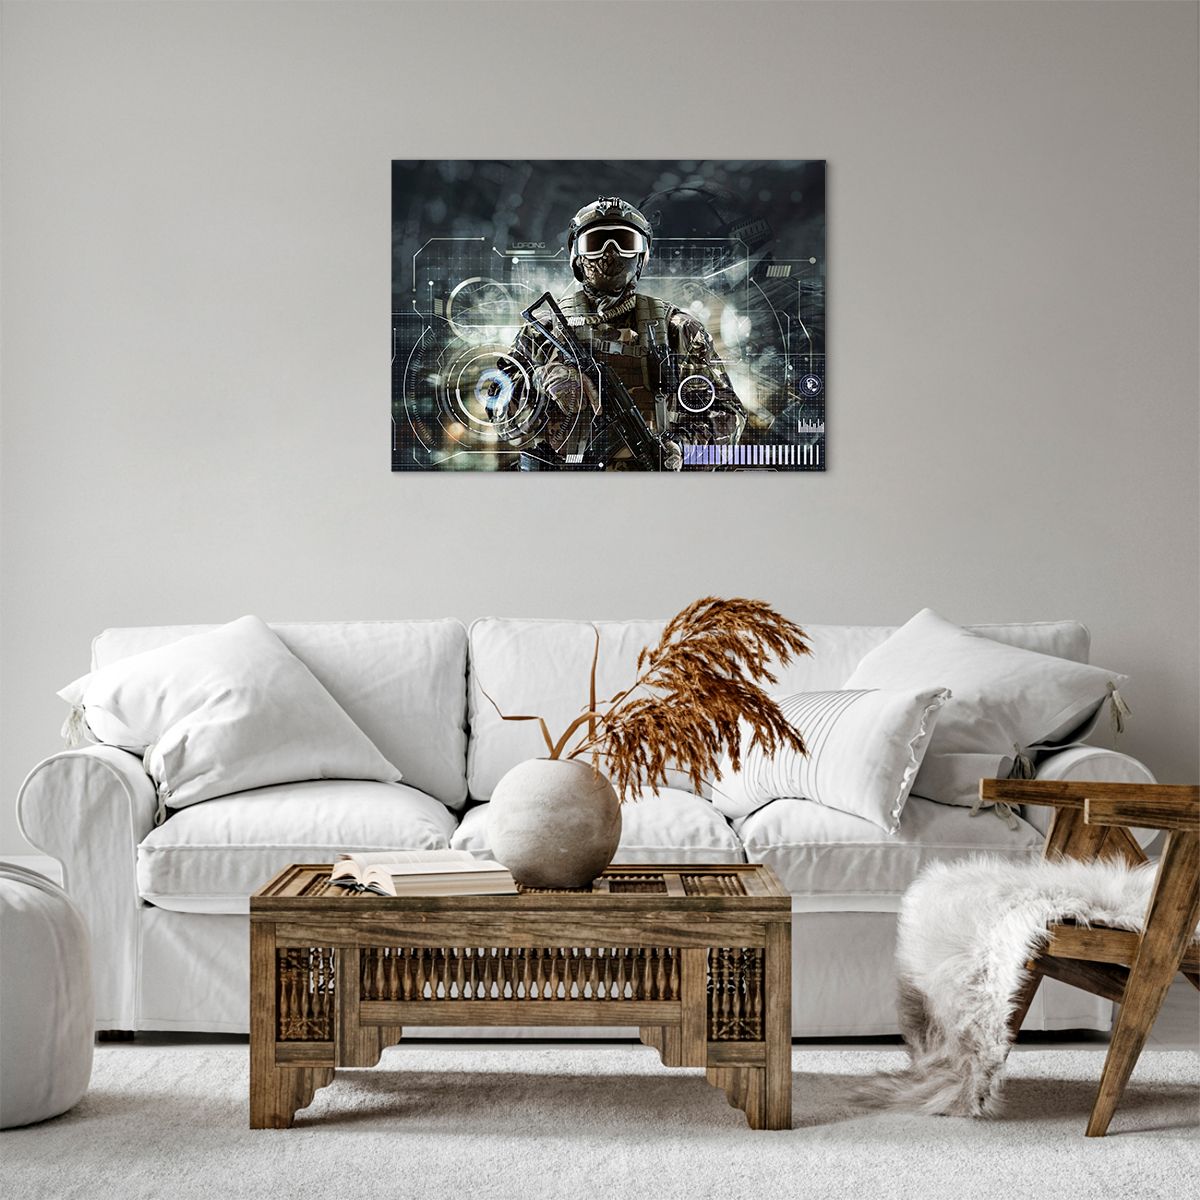 Impression sur toile Abstraction, Impression sur toile Soldat, Impression sur toile Commando, Impression sur toile Militaire, Impression sur toile Fusil